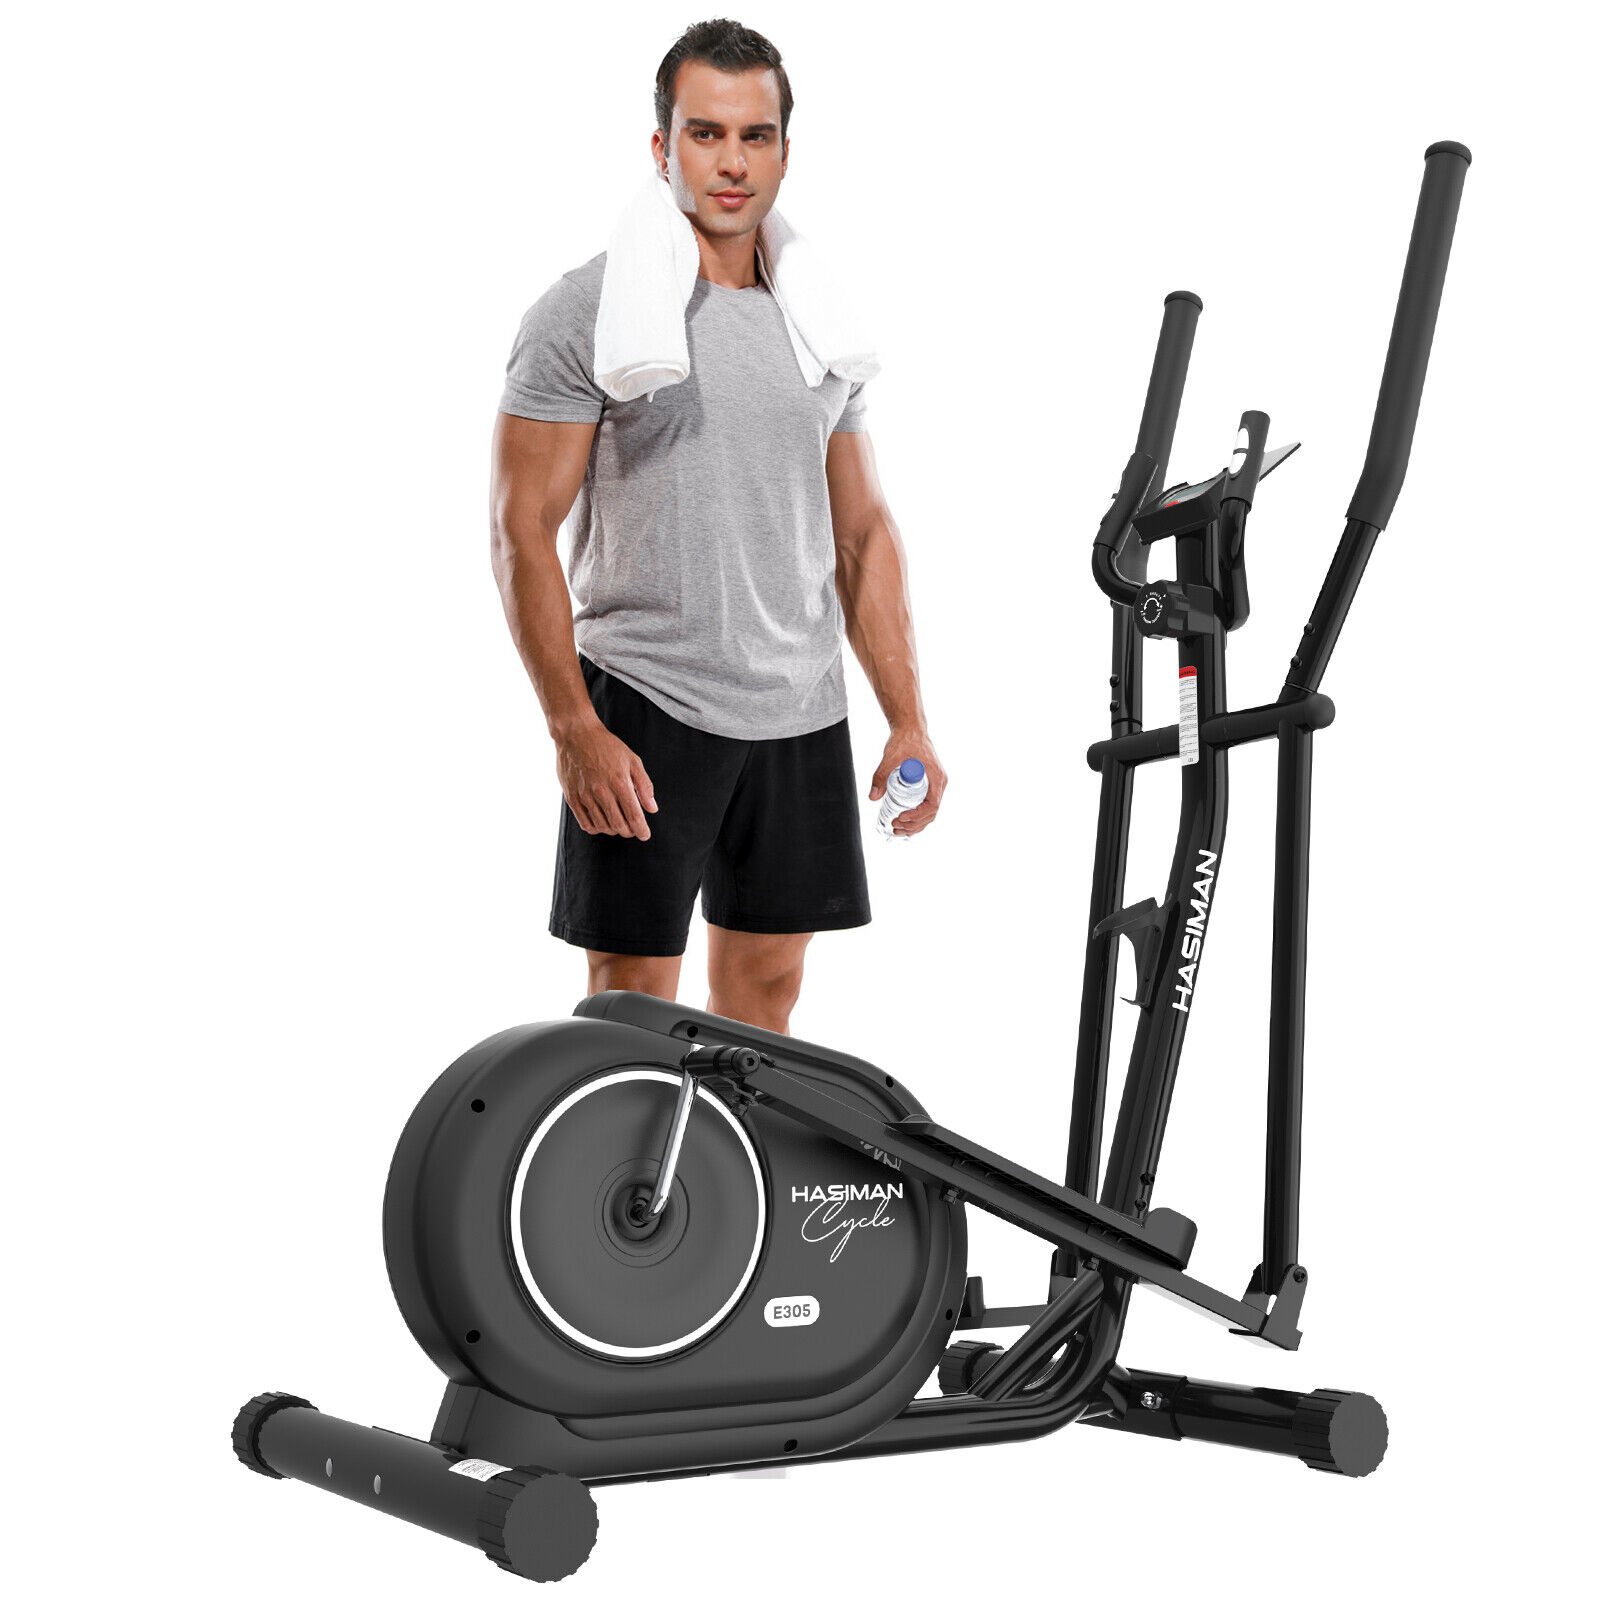 Indoor Cross Trainer for Fitness Workout Gym